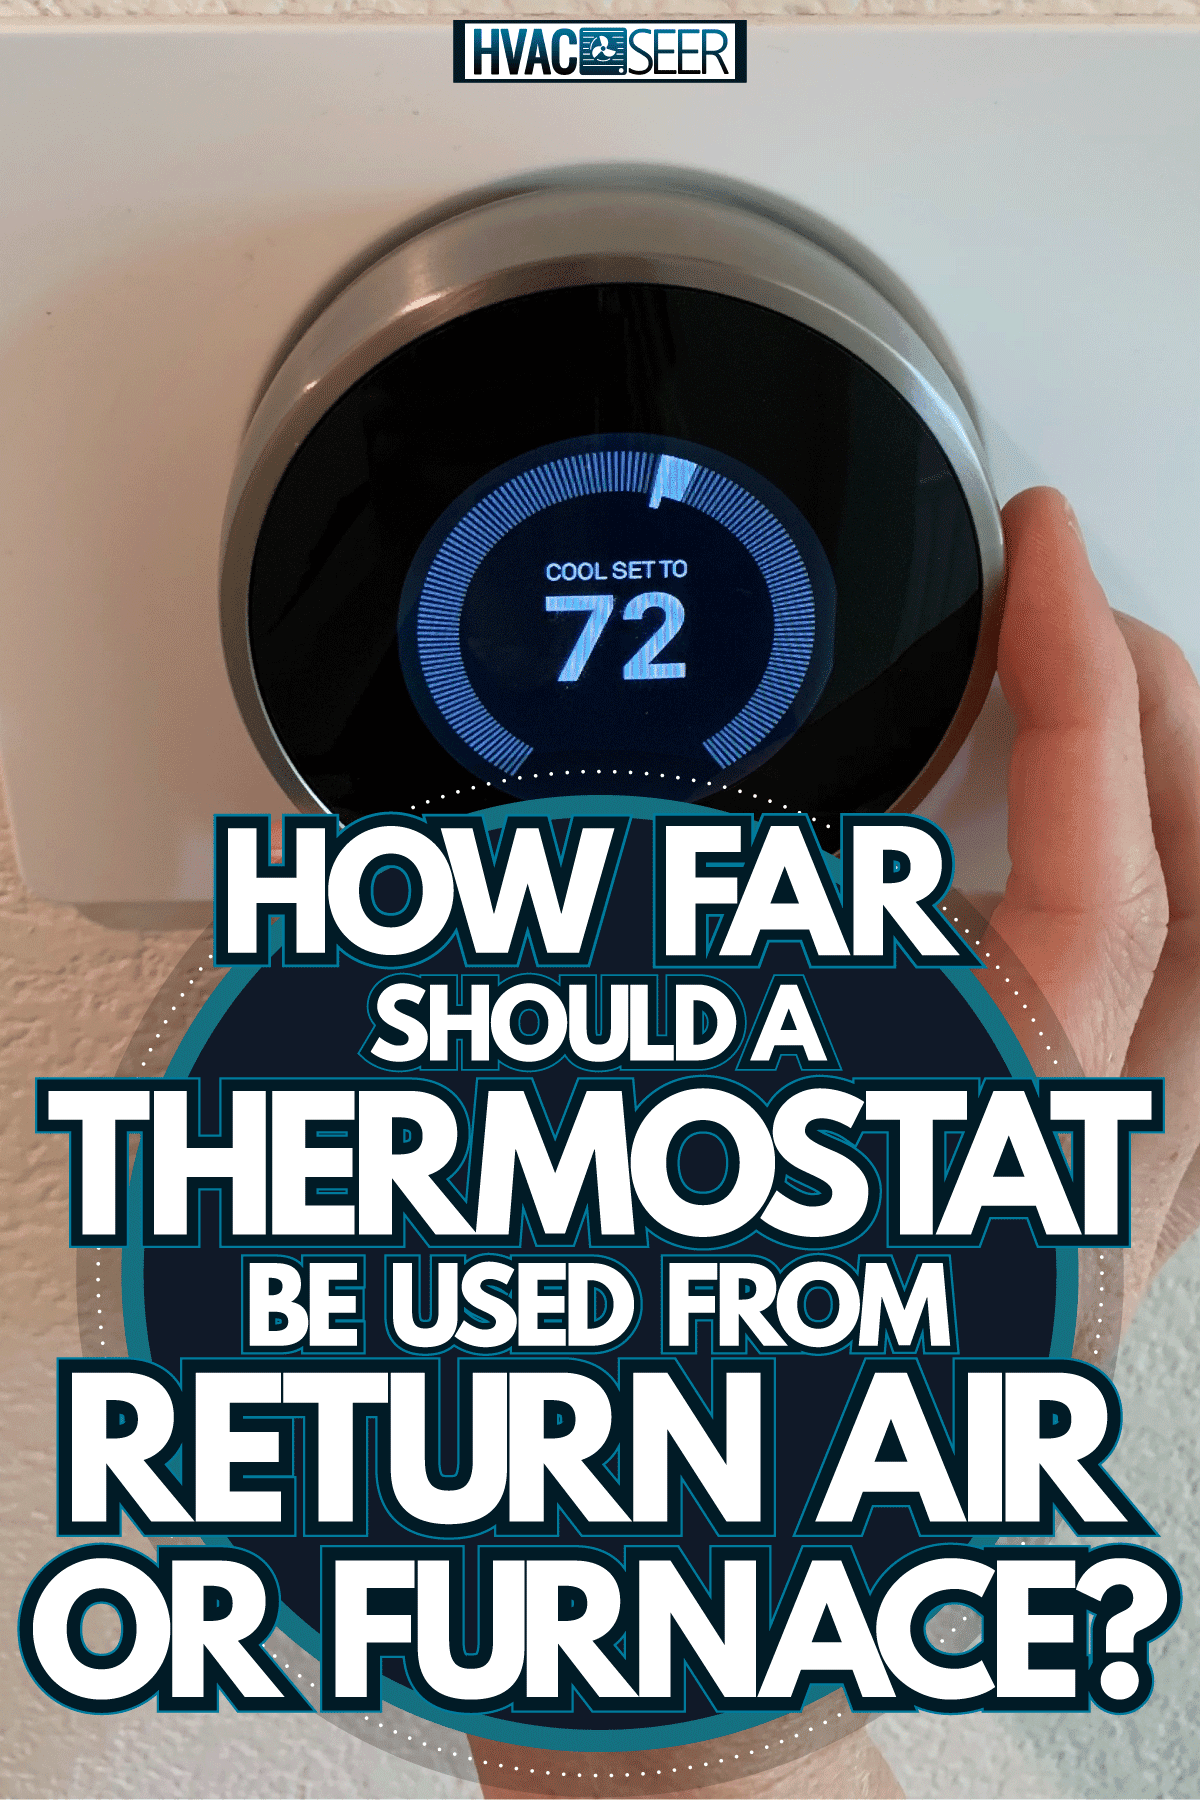 Adjusting the temperature of the thermostat, How Far Should A Thermostat Be From Return Air Or Furnace?